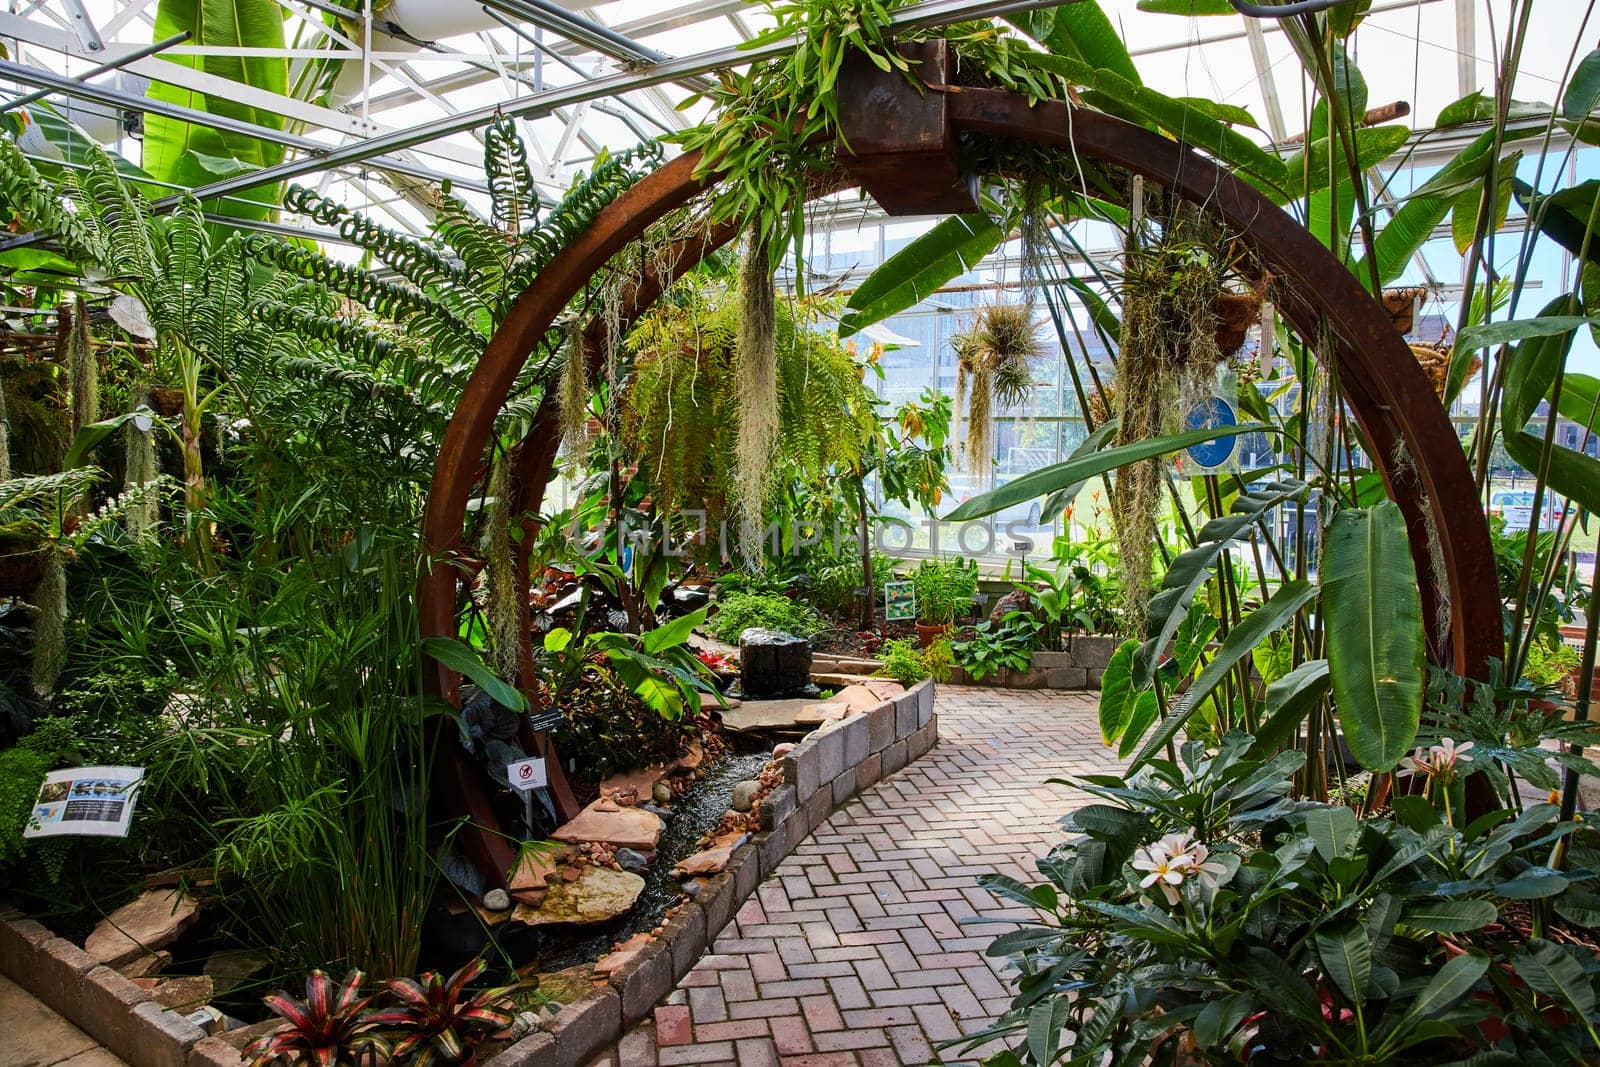 Lush Greenhouse Interior in Muncie, Indiana - An Inviting Pathway Through Tropical Exuberance